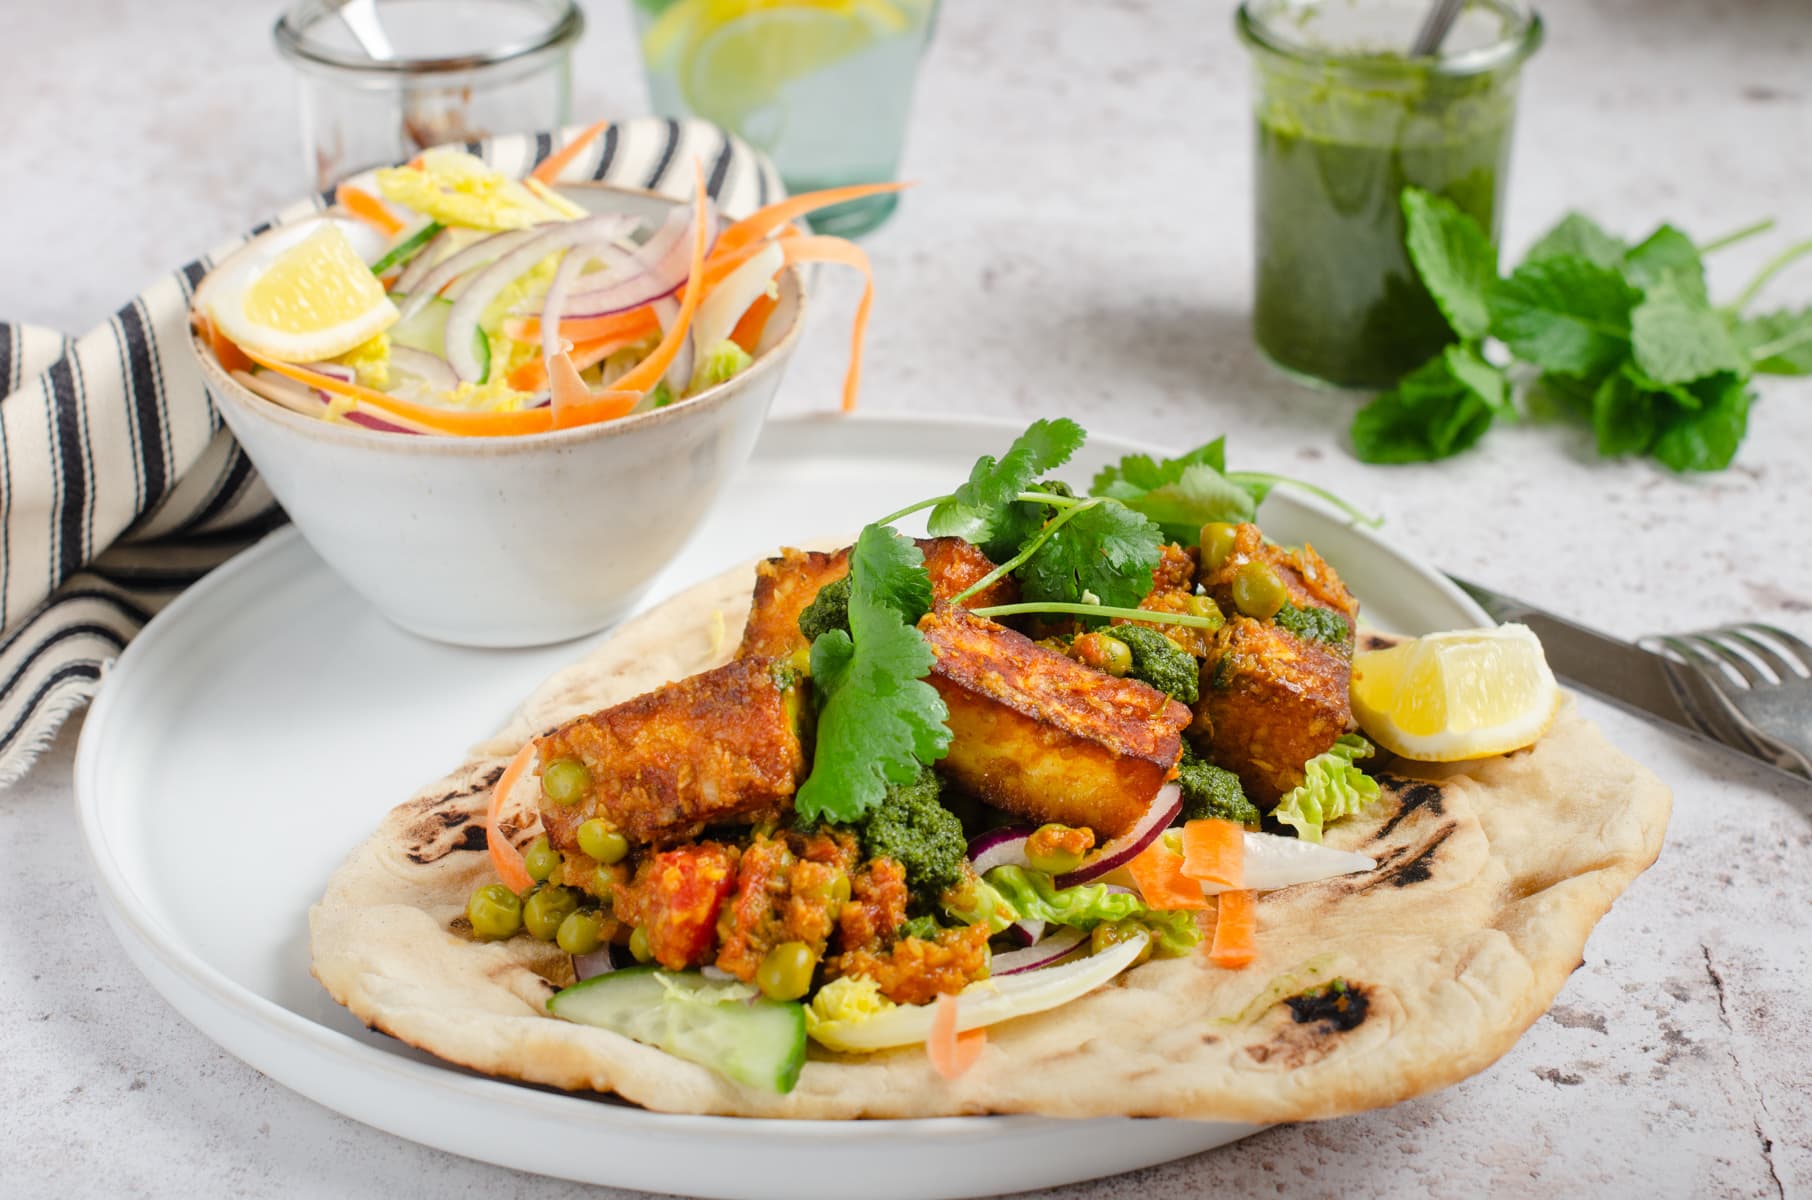 A paneer cheese curry on a top of a flatbread served with a side crunchy salad and green and date chutney.